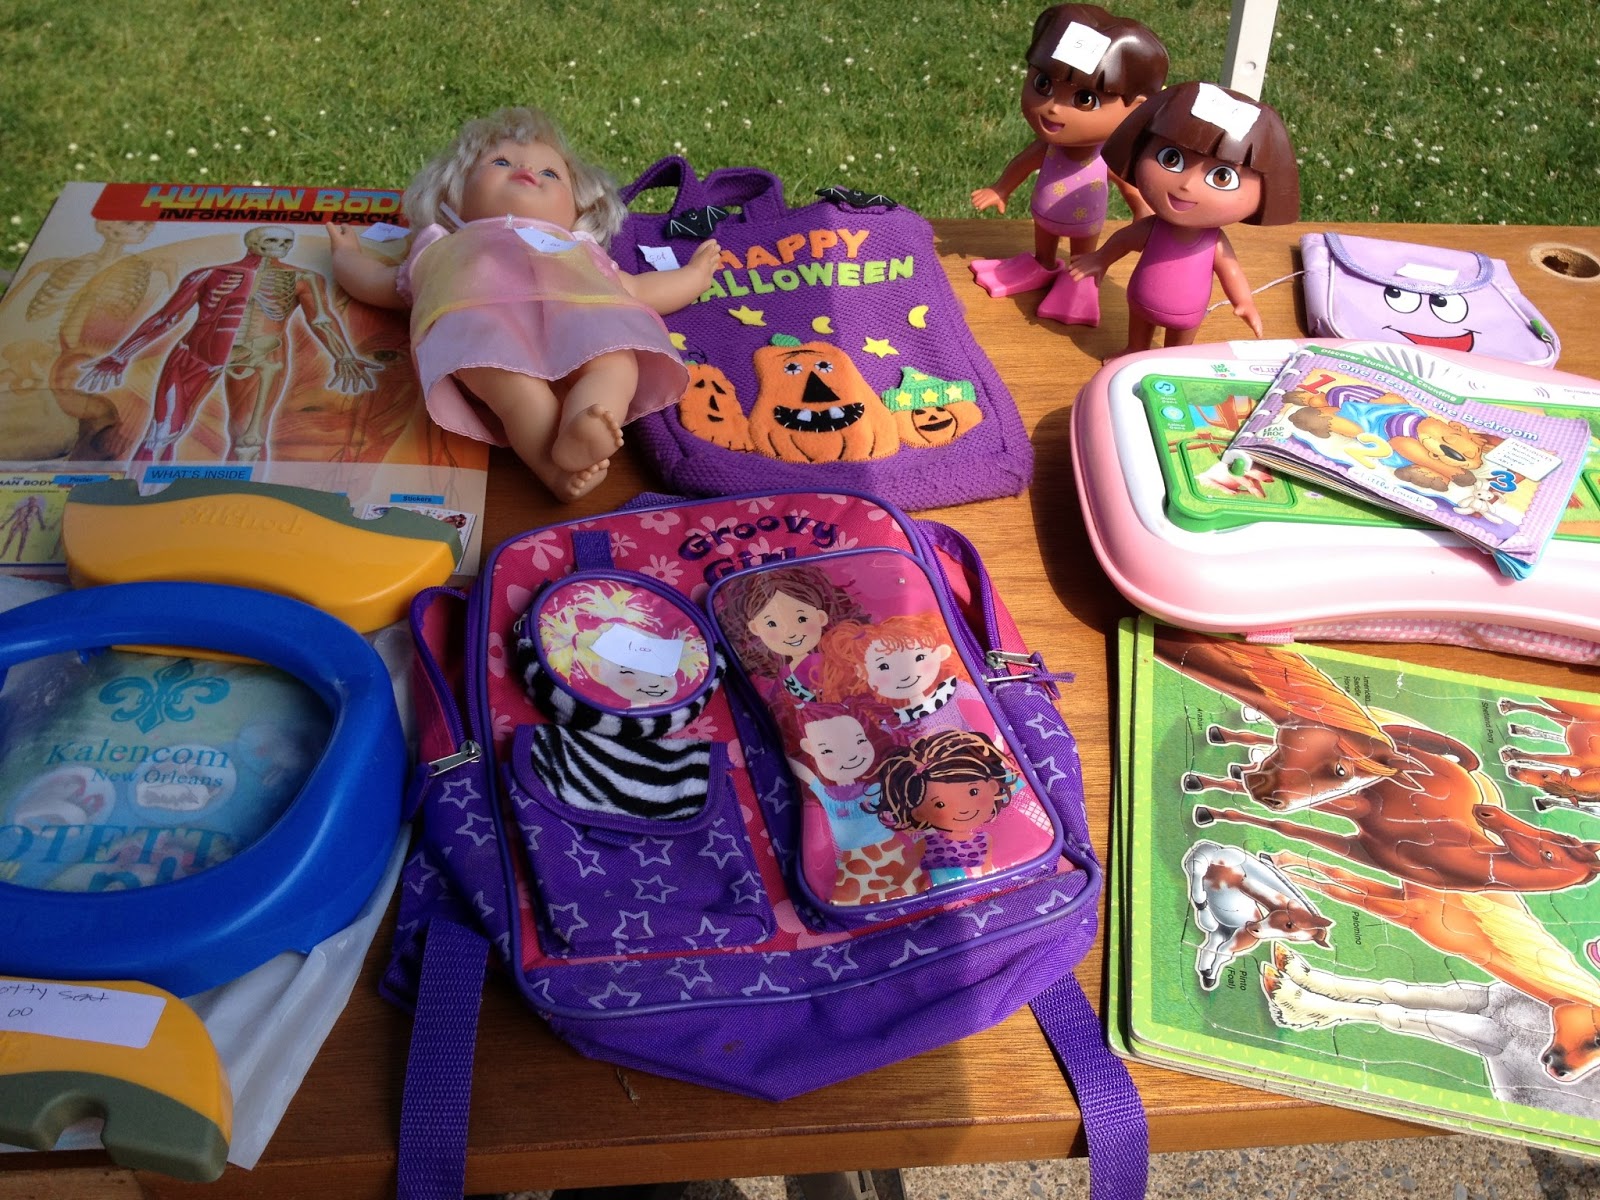 How to Price Kids' Stuff, Toys, and Clothes at a Garage Sale